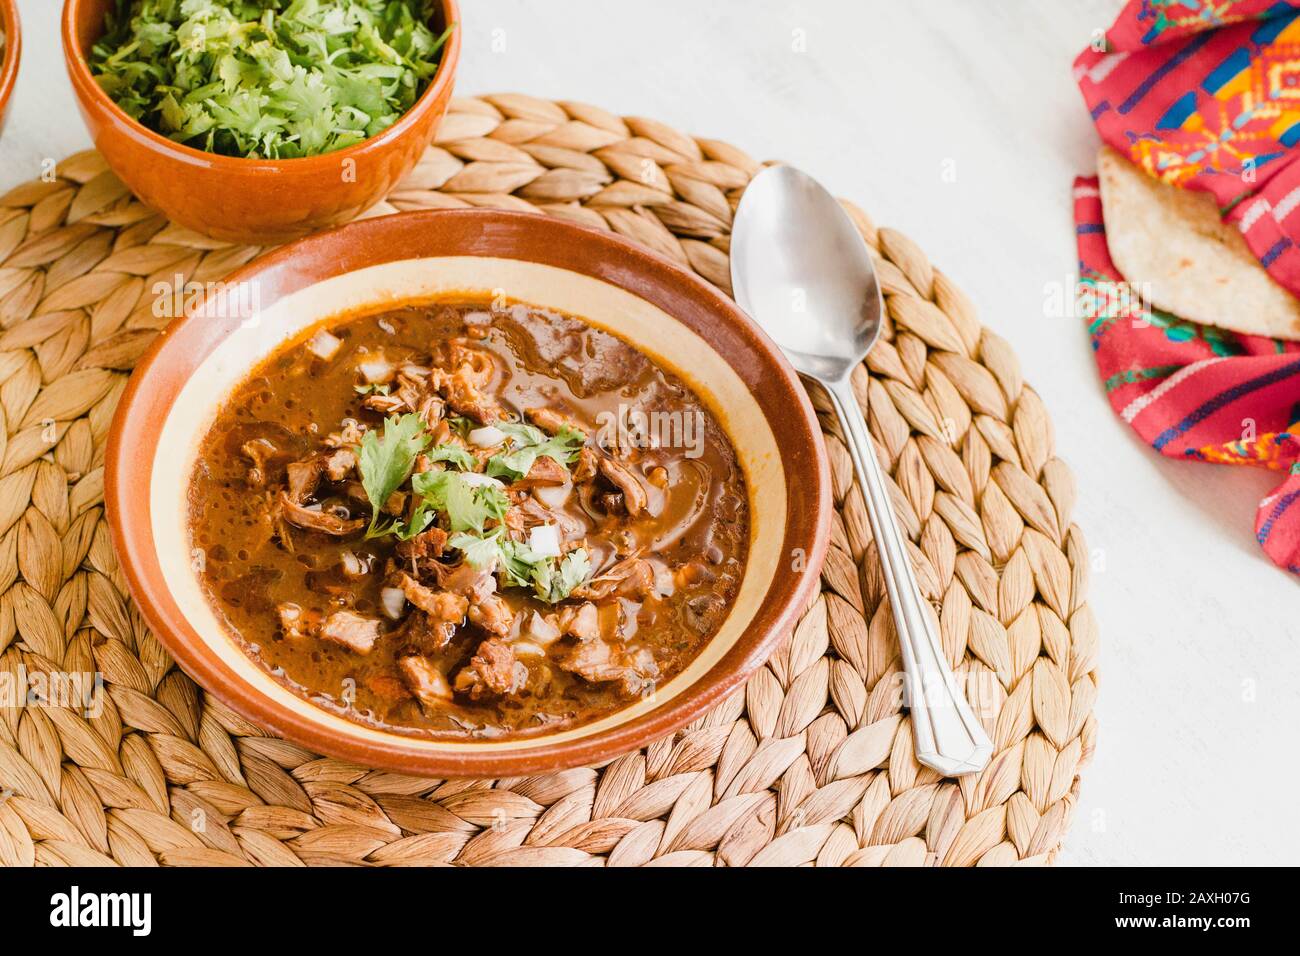 Authentic mexican birria de res, a spicy beef, goat or mutton stew from Jalisco, Mexico Stock Photo